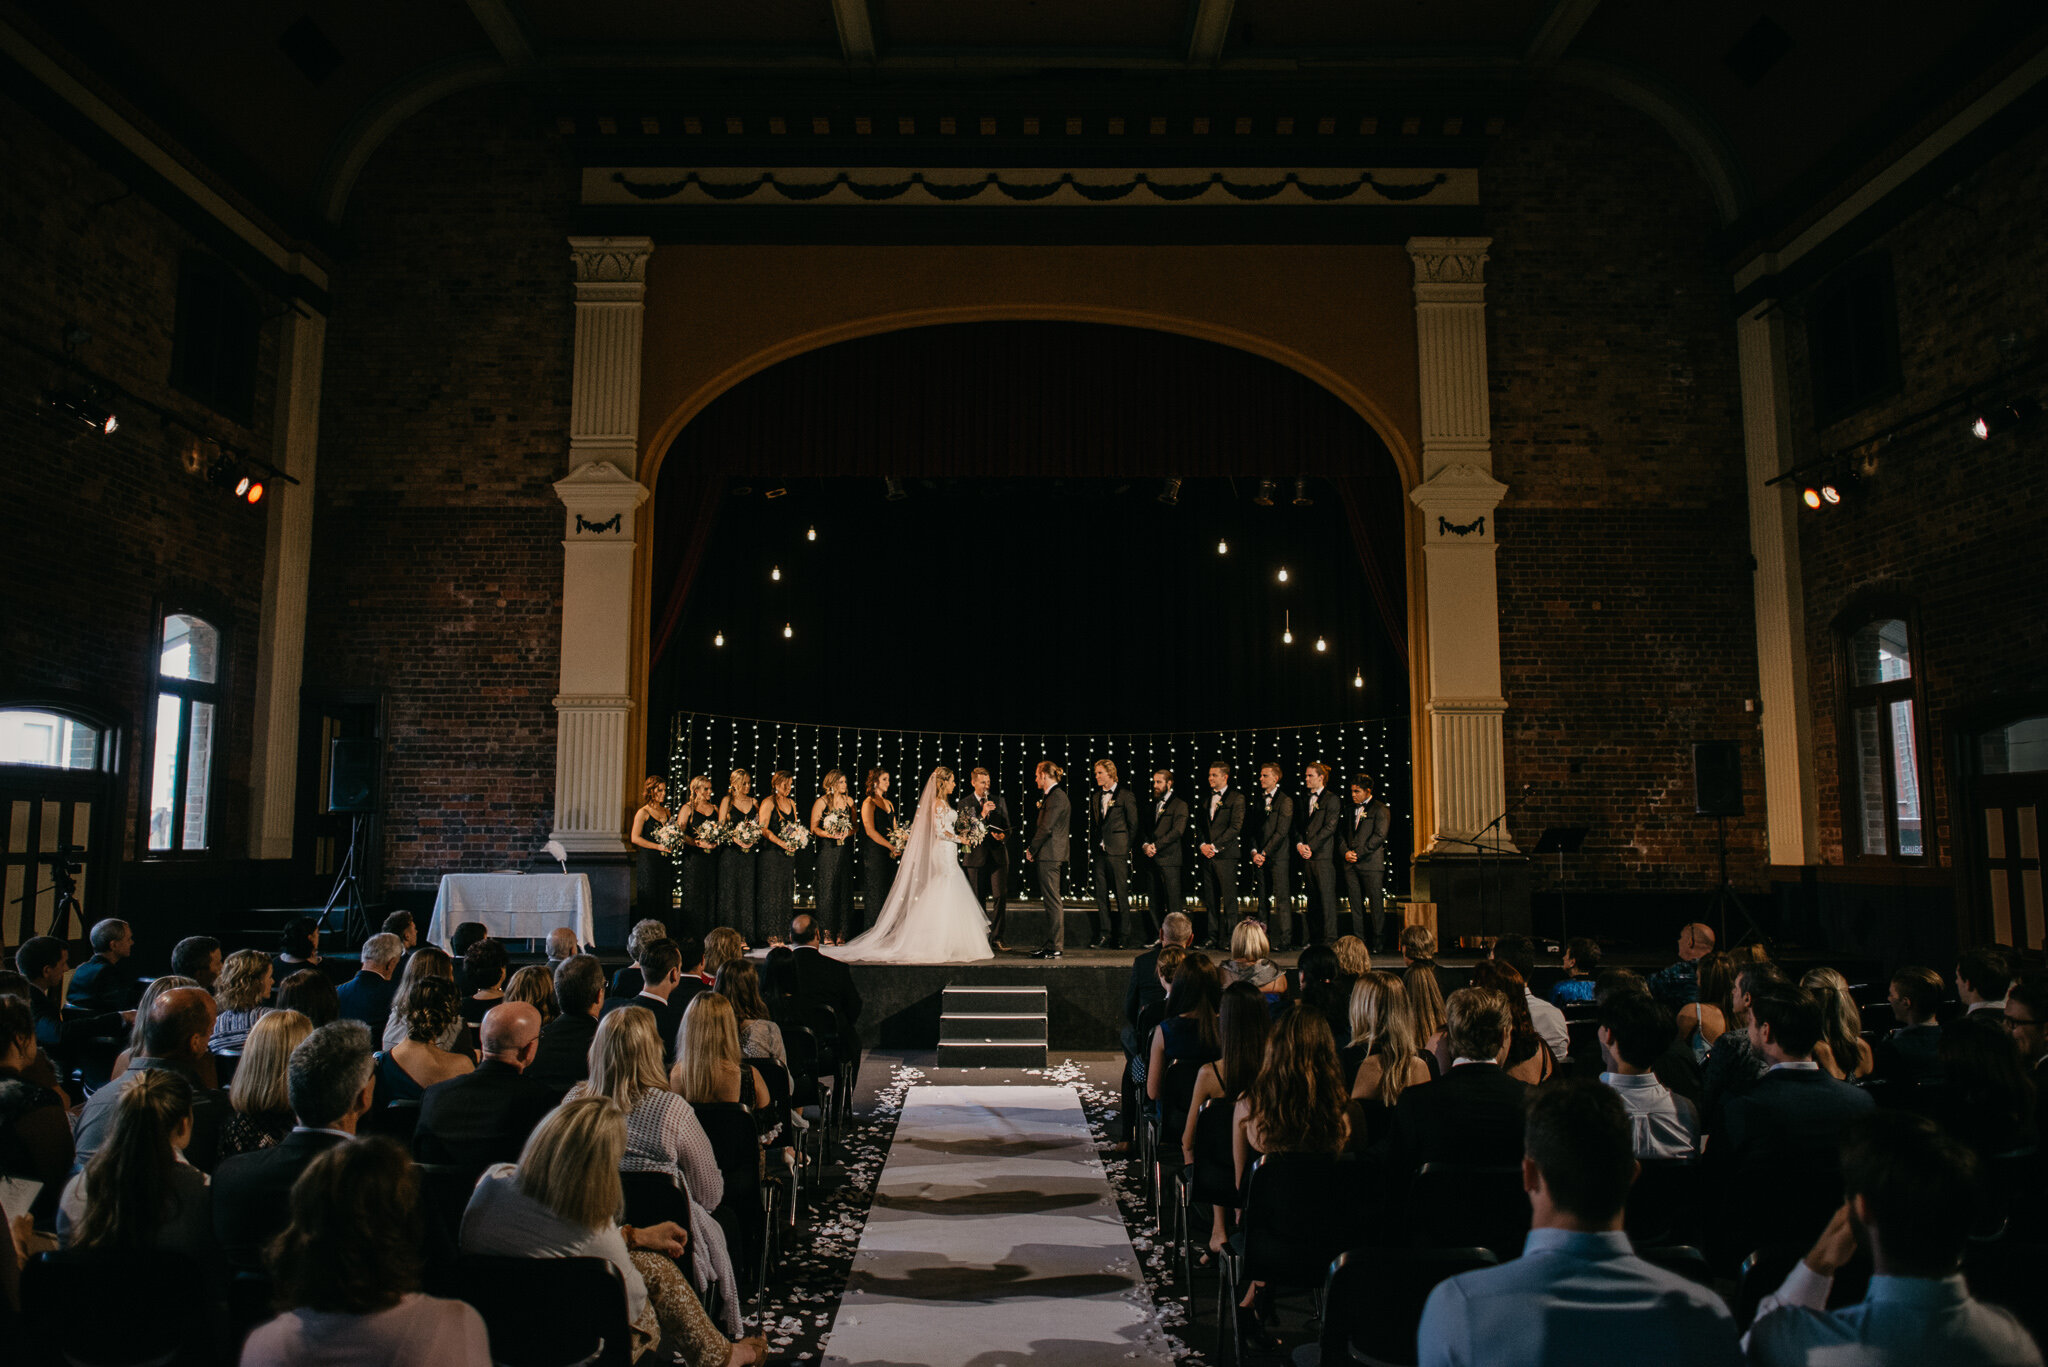 Princess Theatre Wooloongabba Brisbane wedding - Trent and Jessie photography and videography 